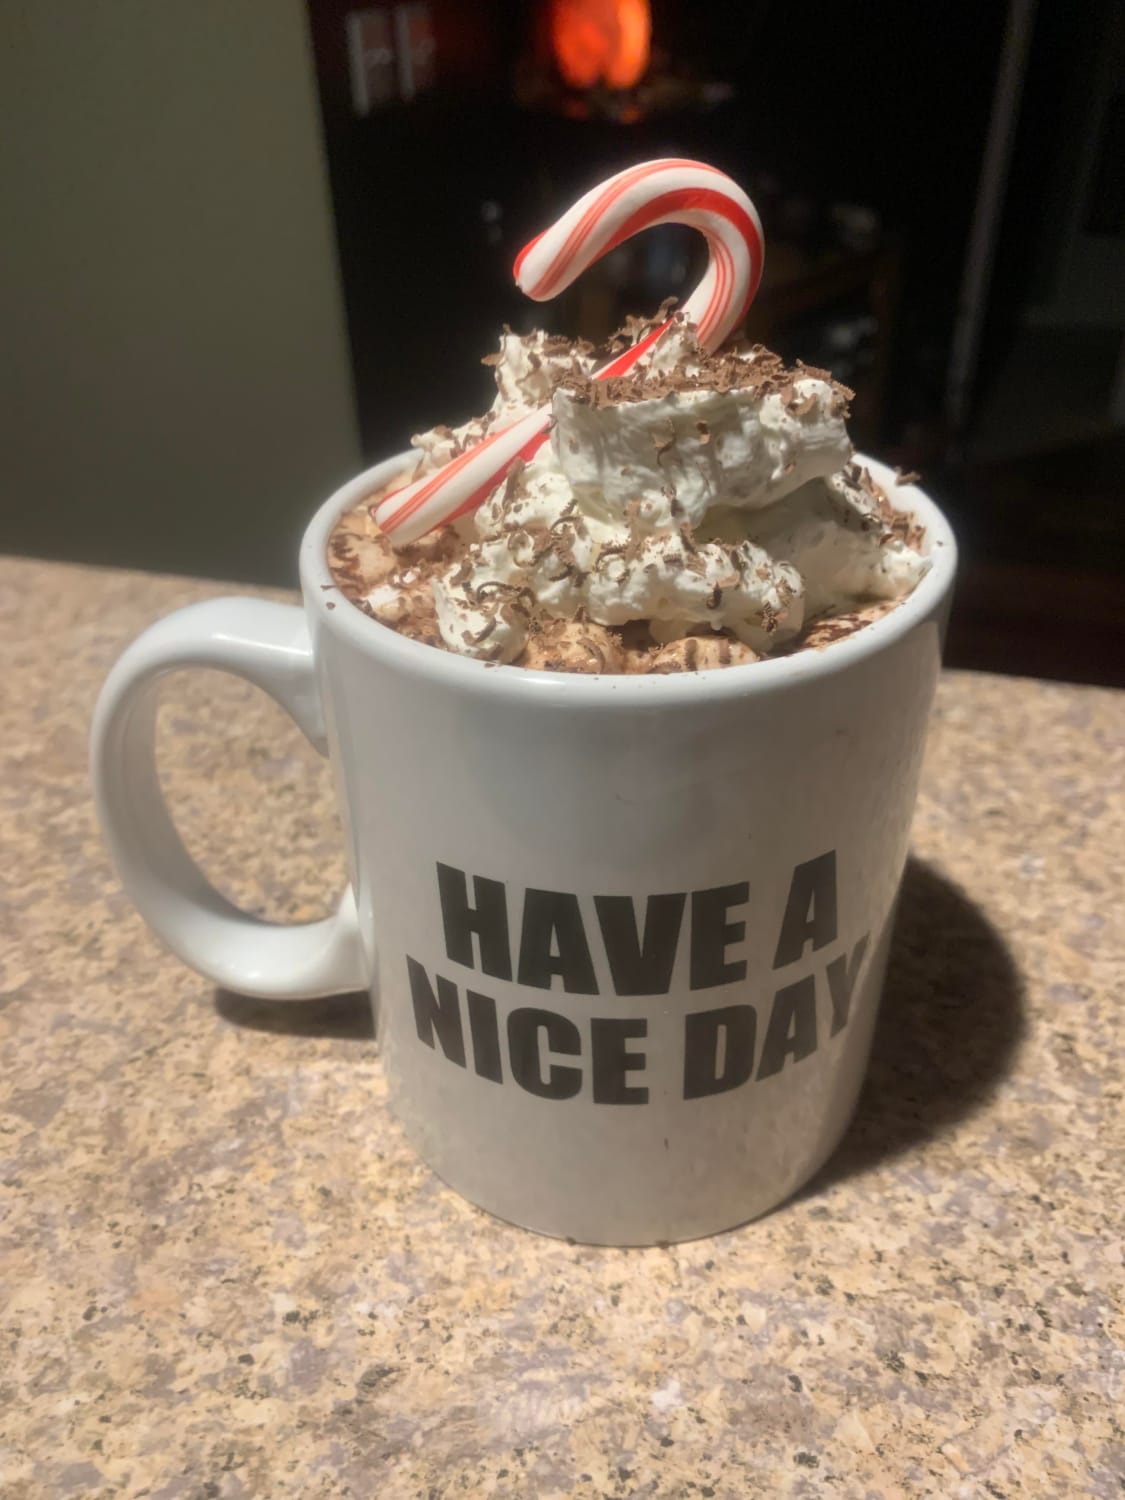 I made Peppermint Hot Chocolate to appease the snow gods and bring us a winter wonderland.